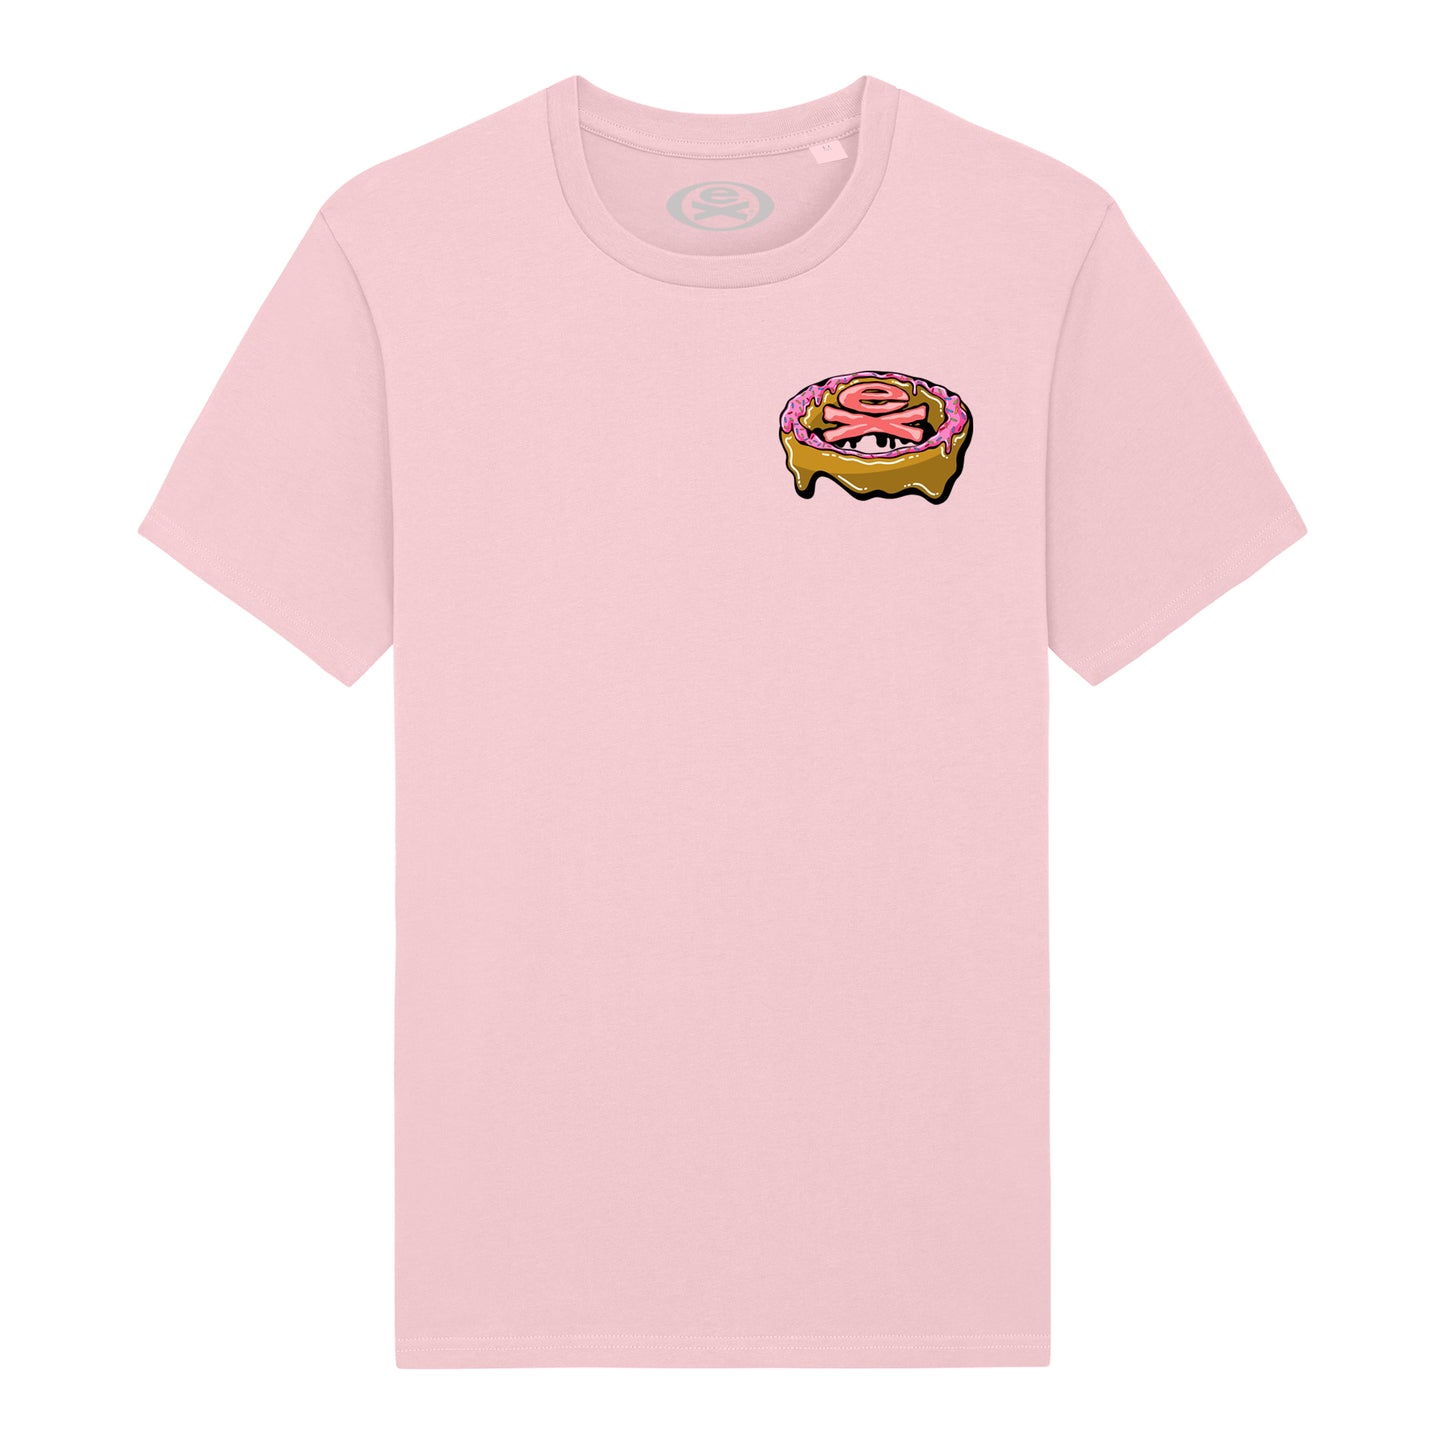 Go Nuts T-Shirt - Pink